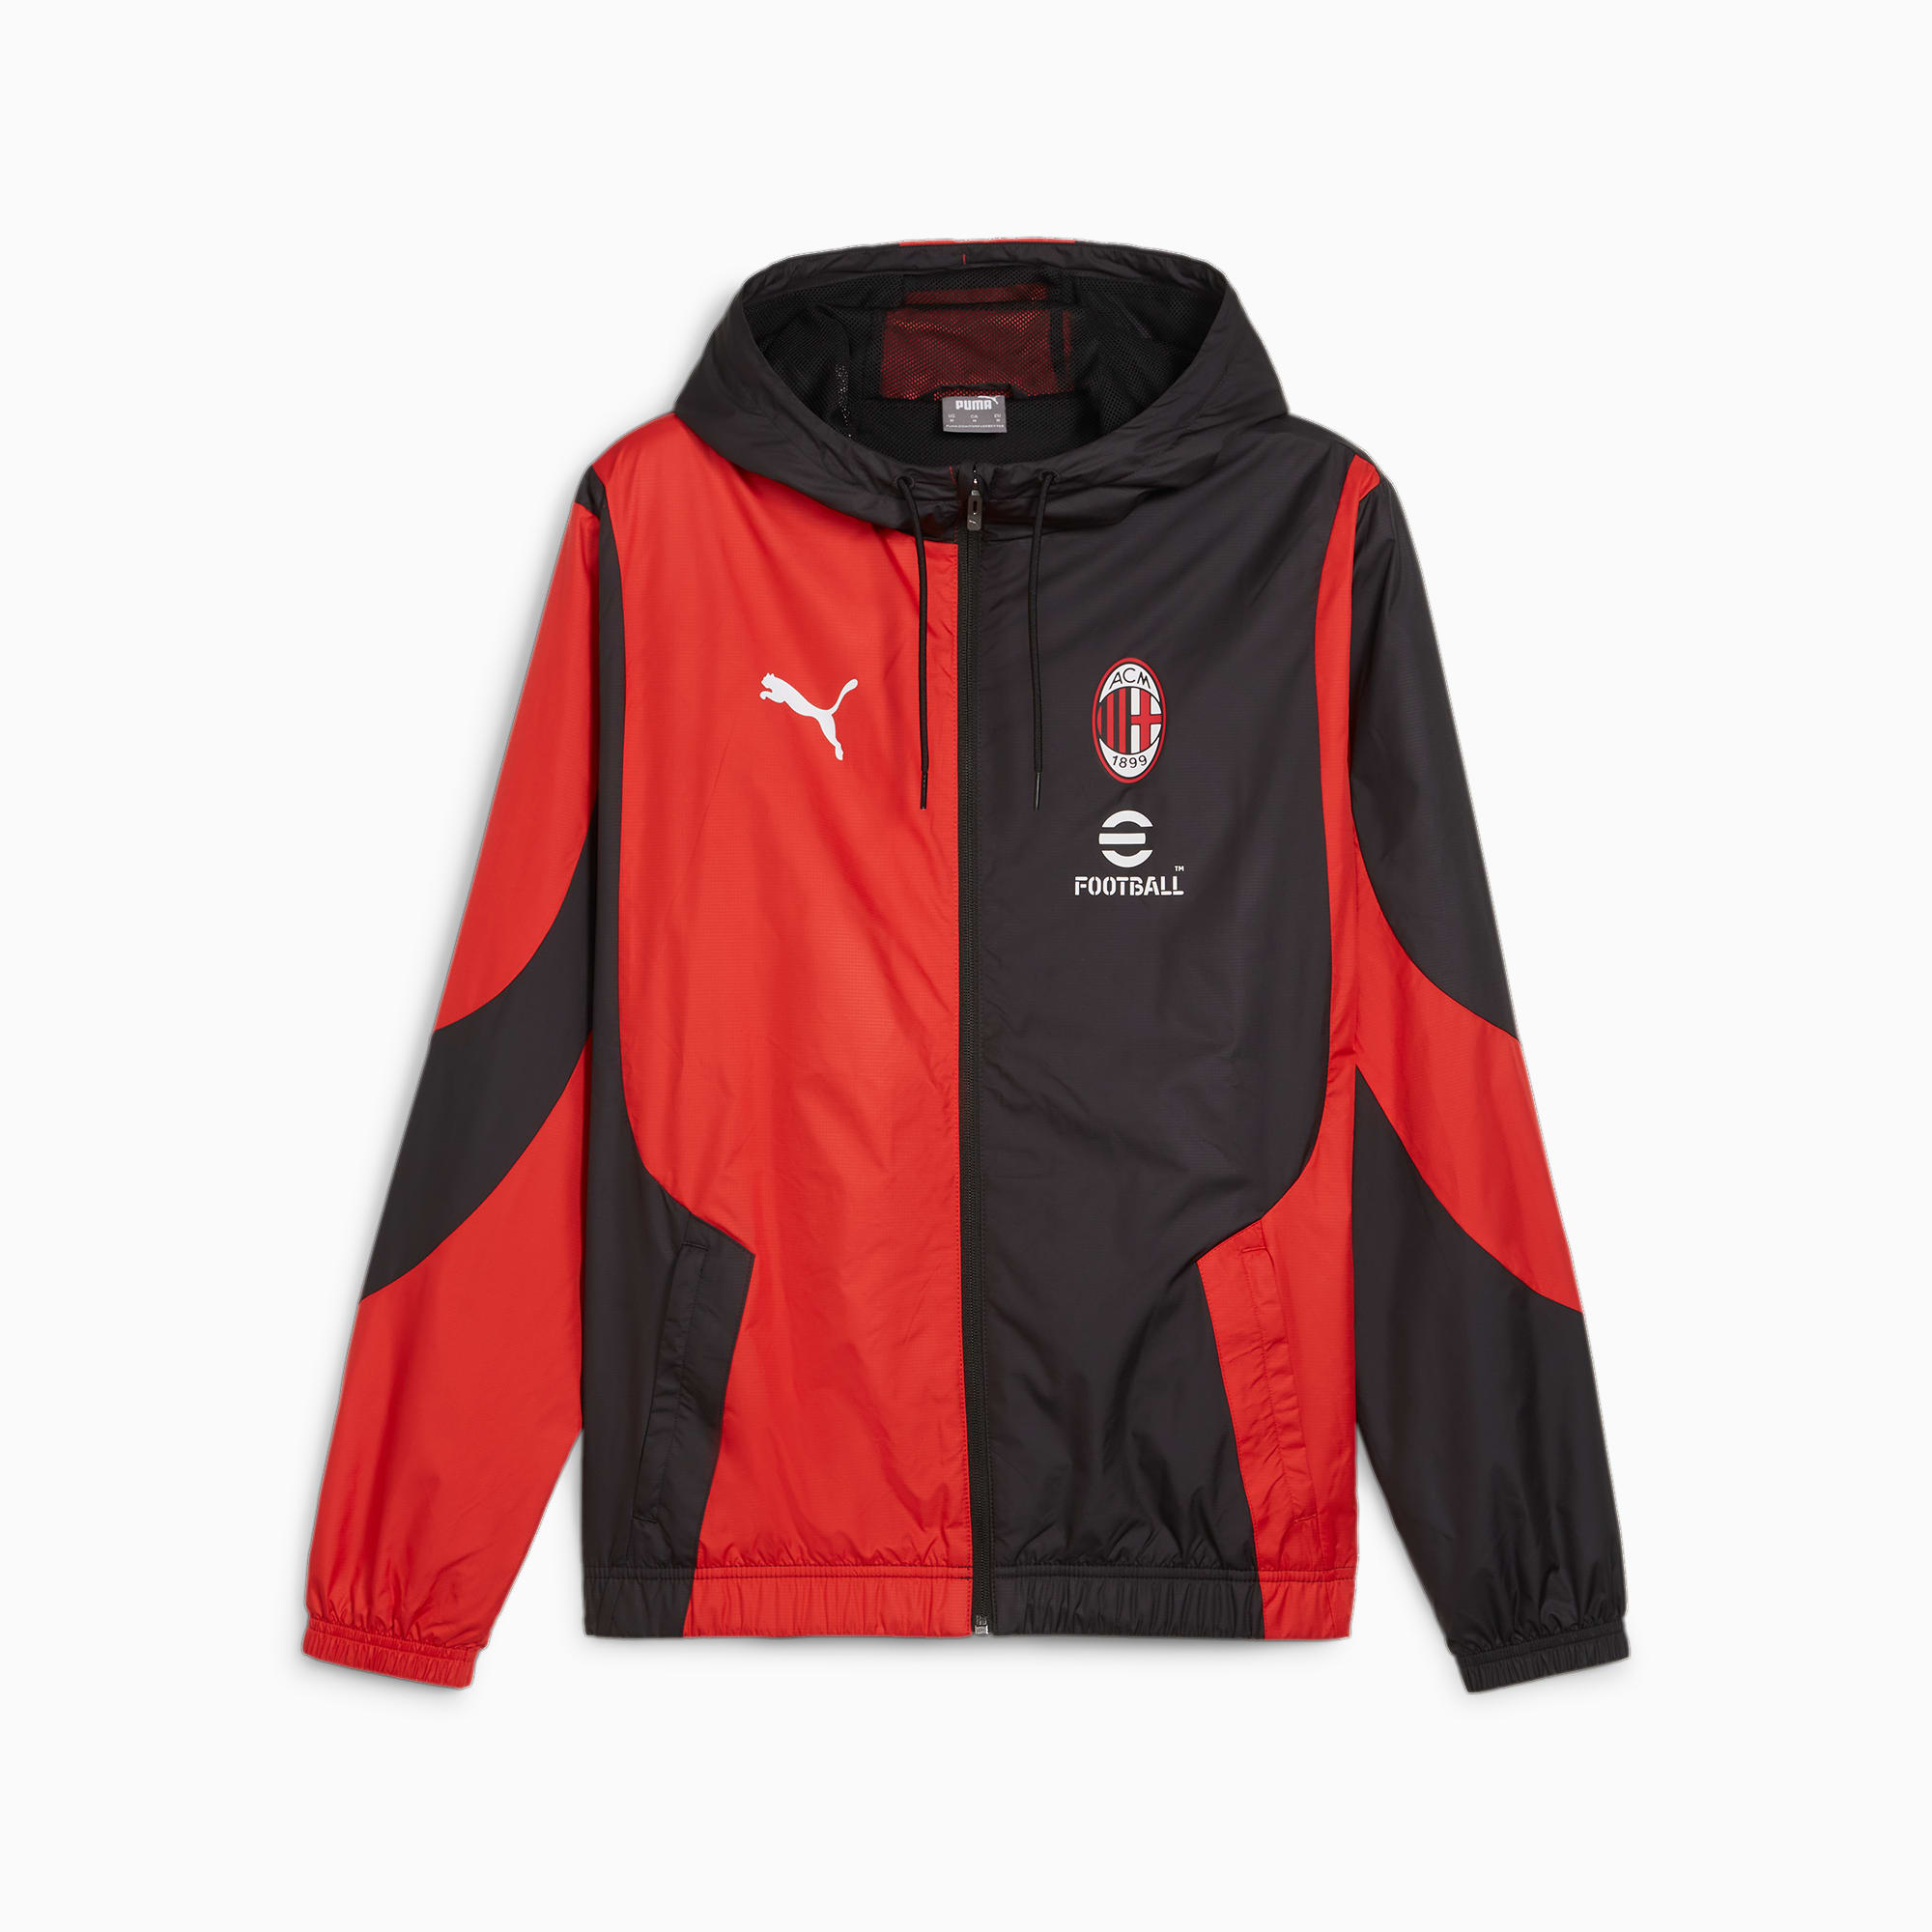 Men's PUMA AC Milan Pre-Match Jacket, Black/For All Time Red, Size XXL, Clothing